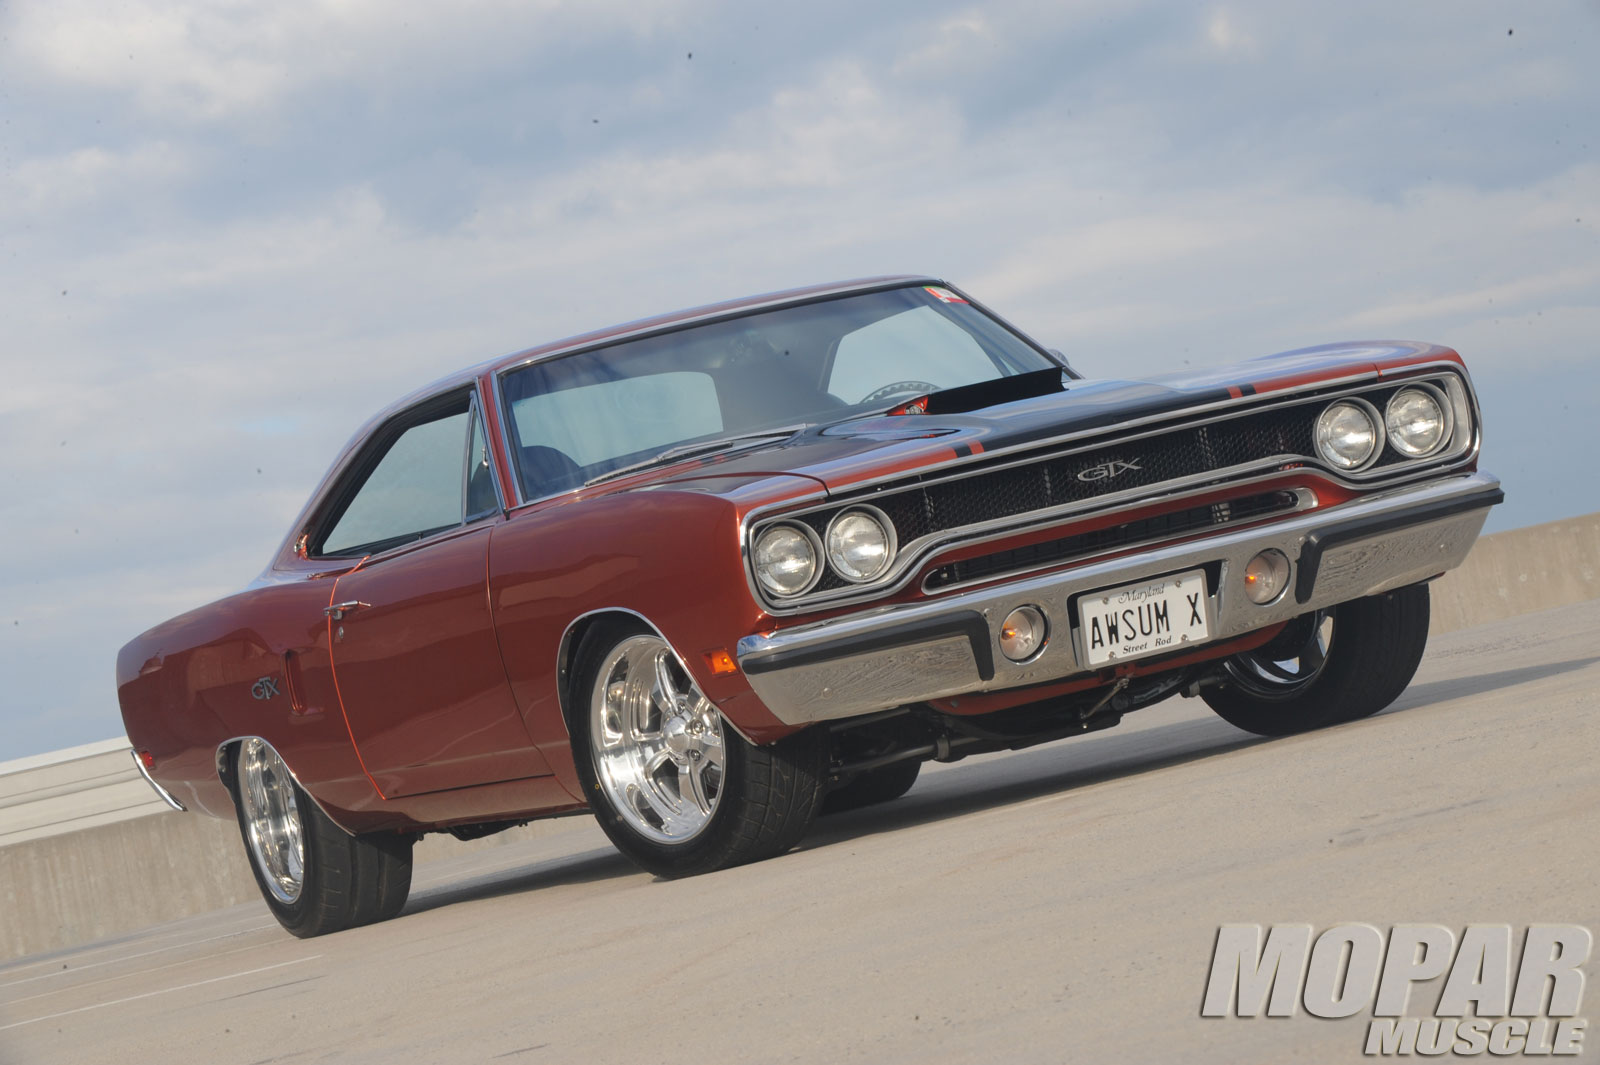 Amazing 1972 Plymouth Gtx Wallpaper Download